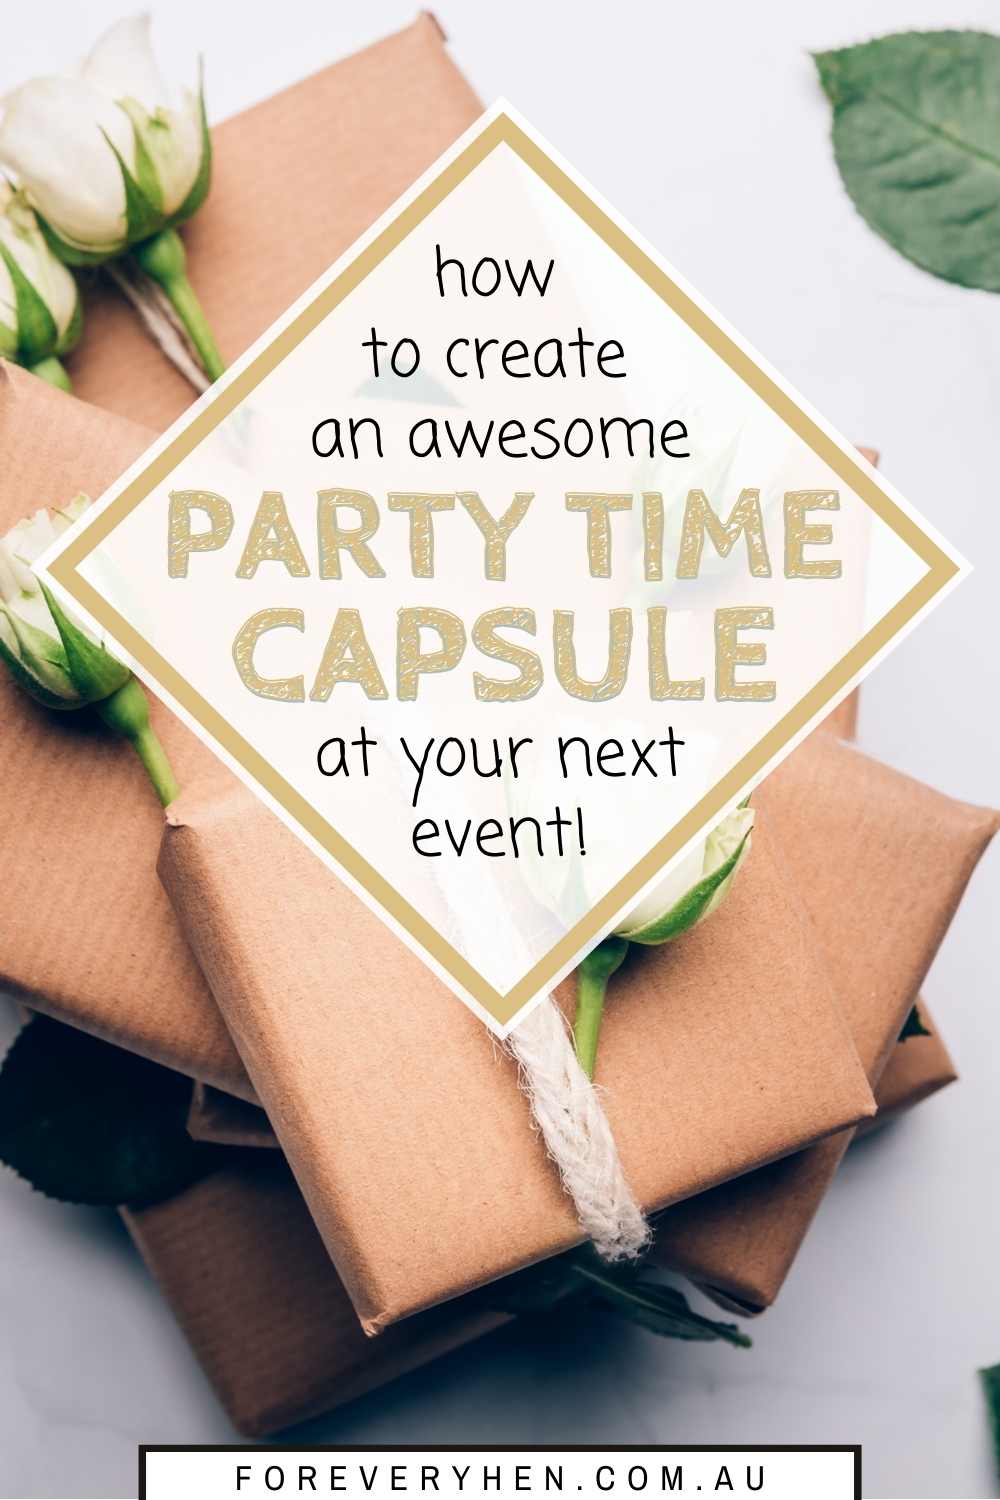 Pinterest Party Time Capsule